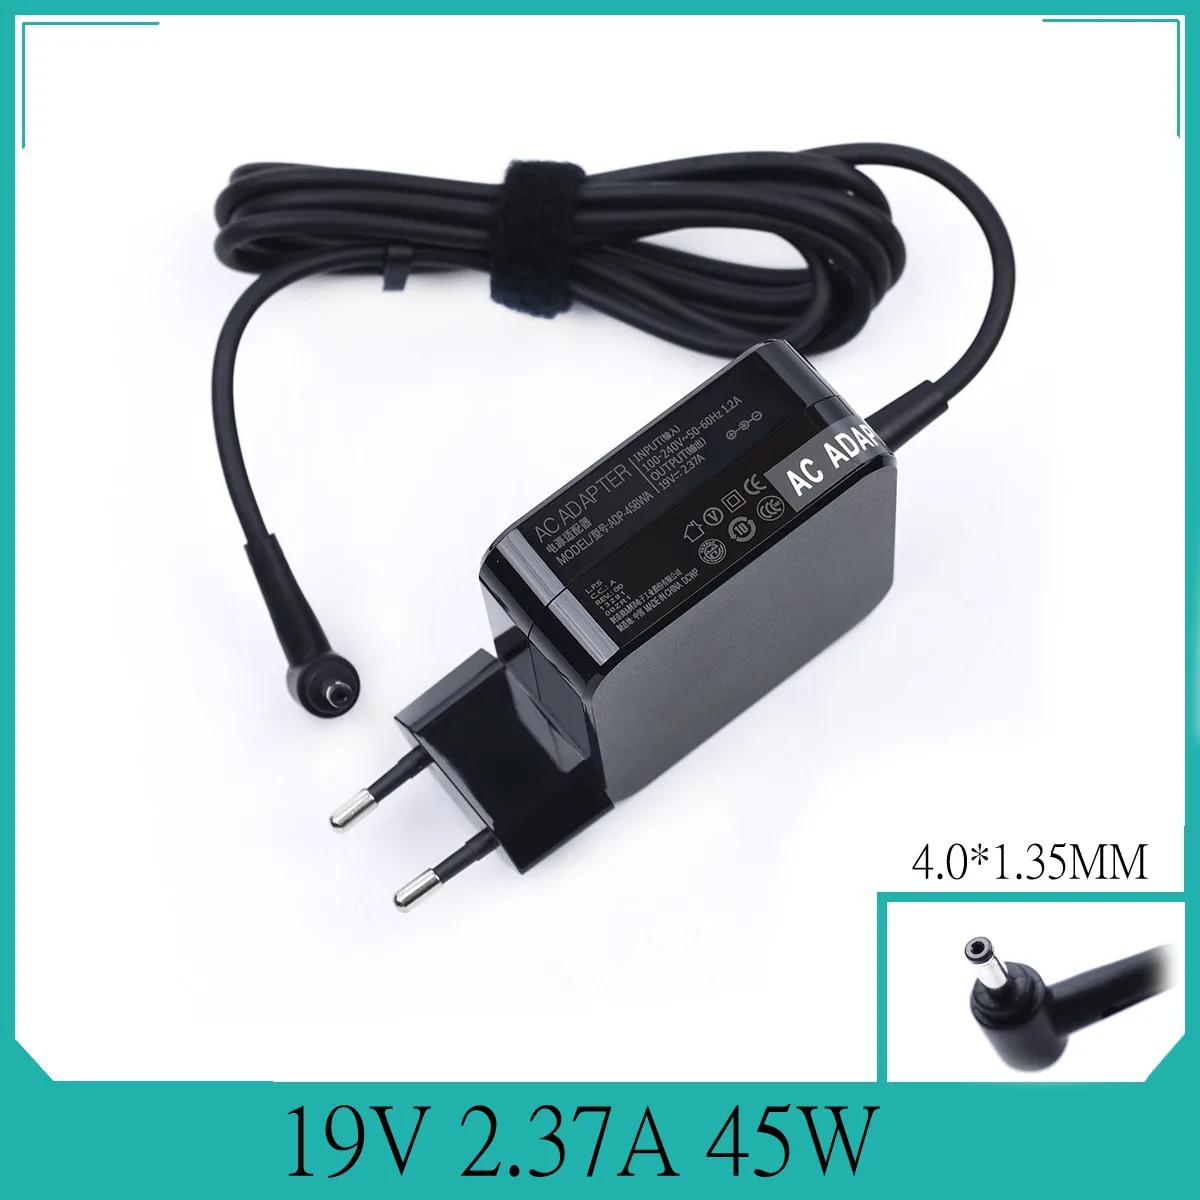 

19V 2.37A 45W 4.0*1.35mm Laptop Charger Adapter ADP-45BW For Asus Zenbook UX305 UX21A UX32A X201E X202E U3000 UX52 Power Supply